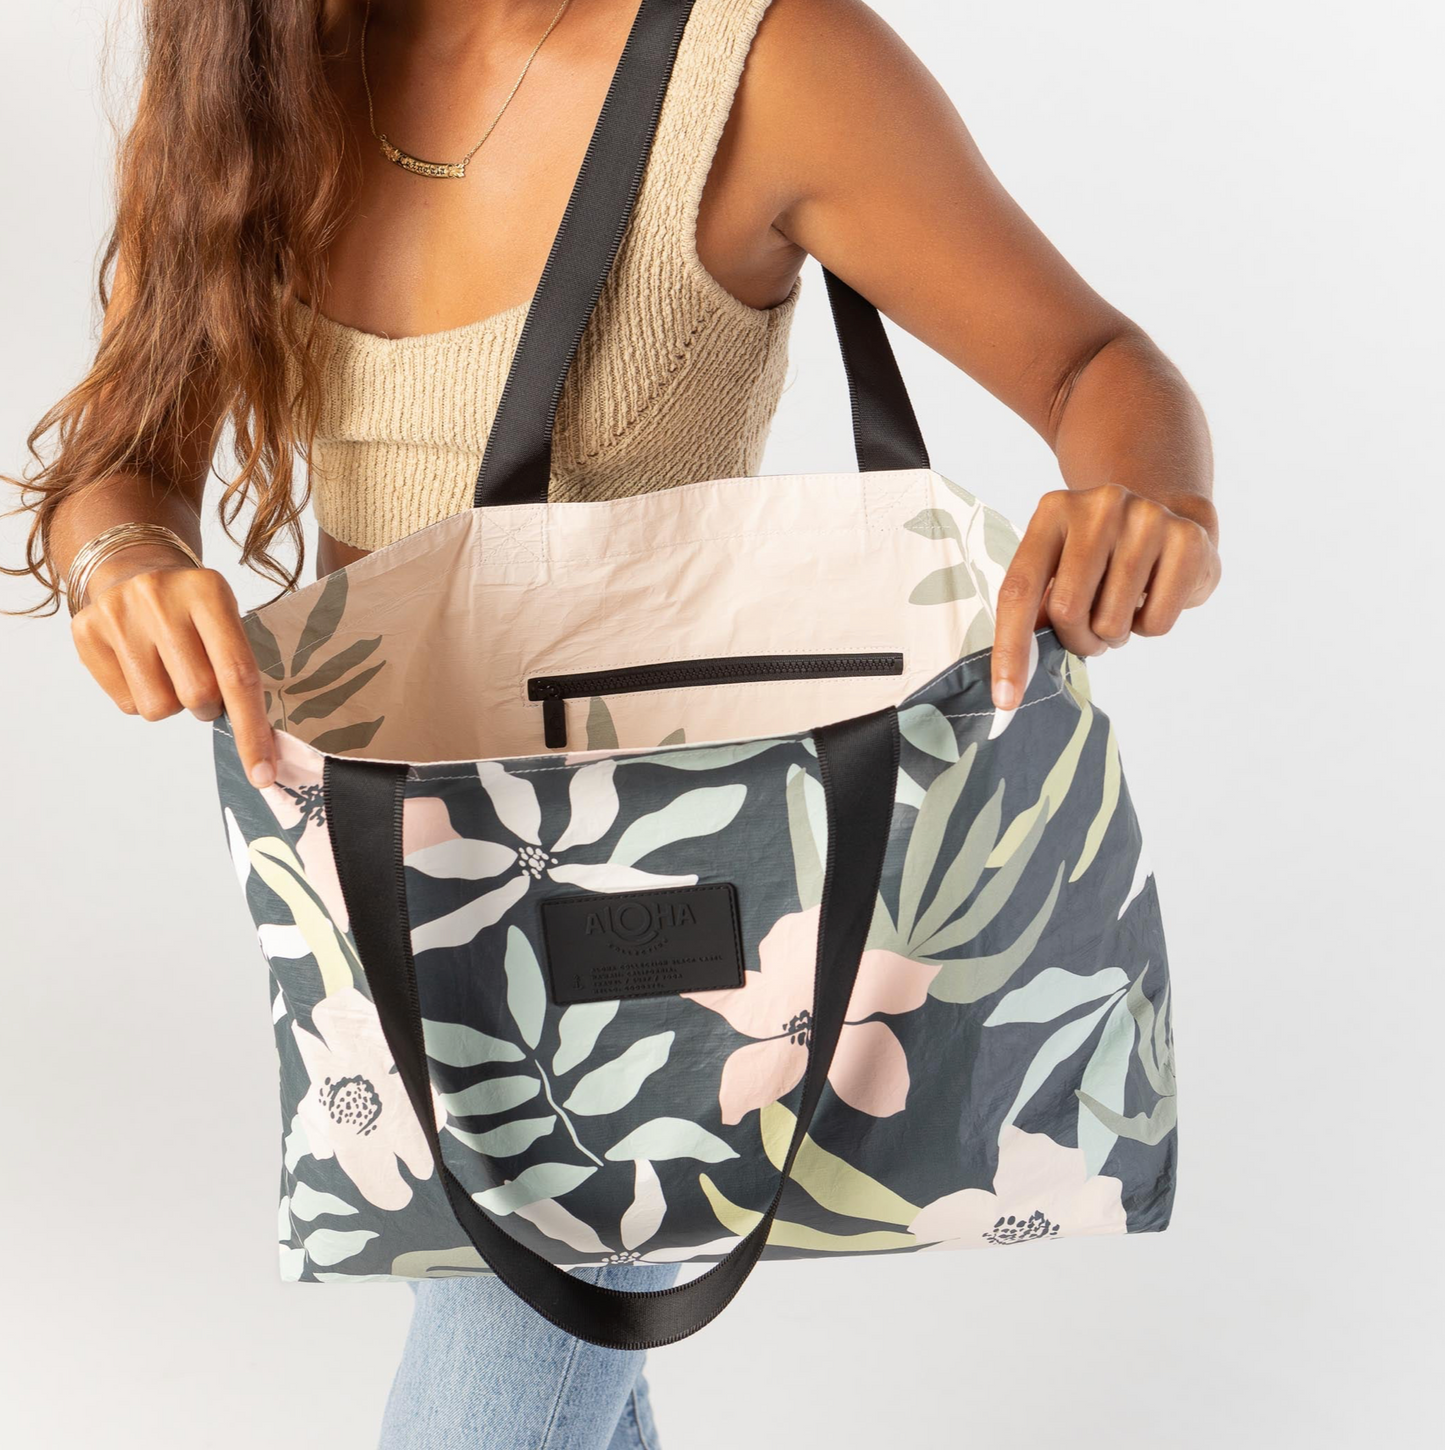 Floral in Eve - Holo Holo Reversible Tote